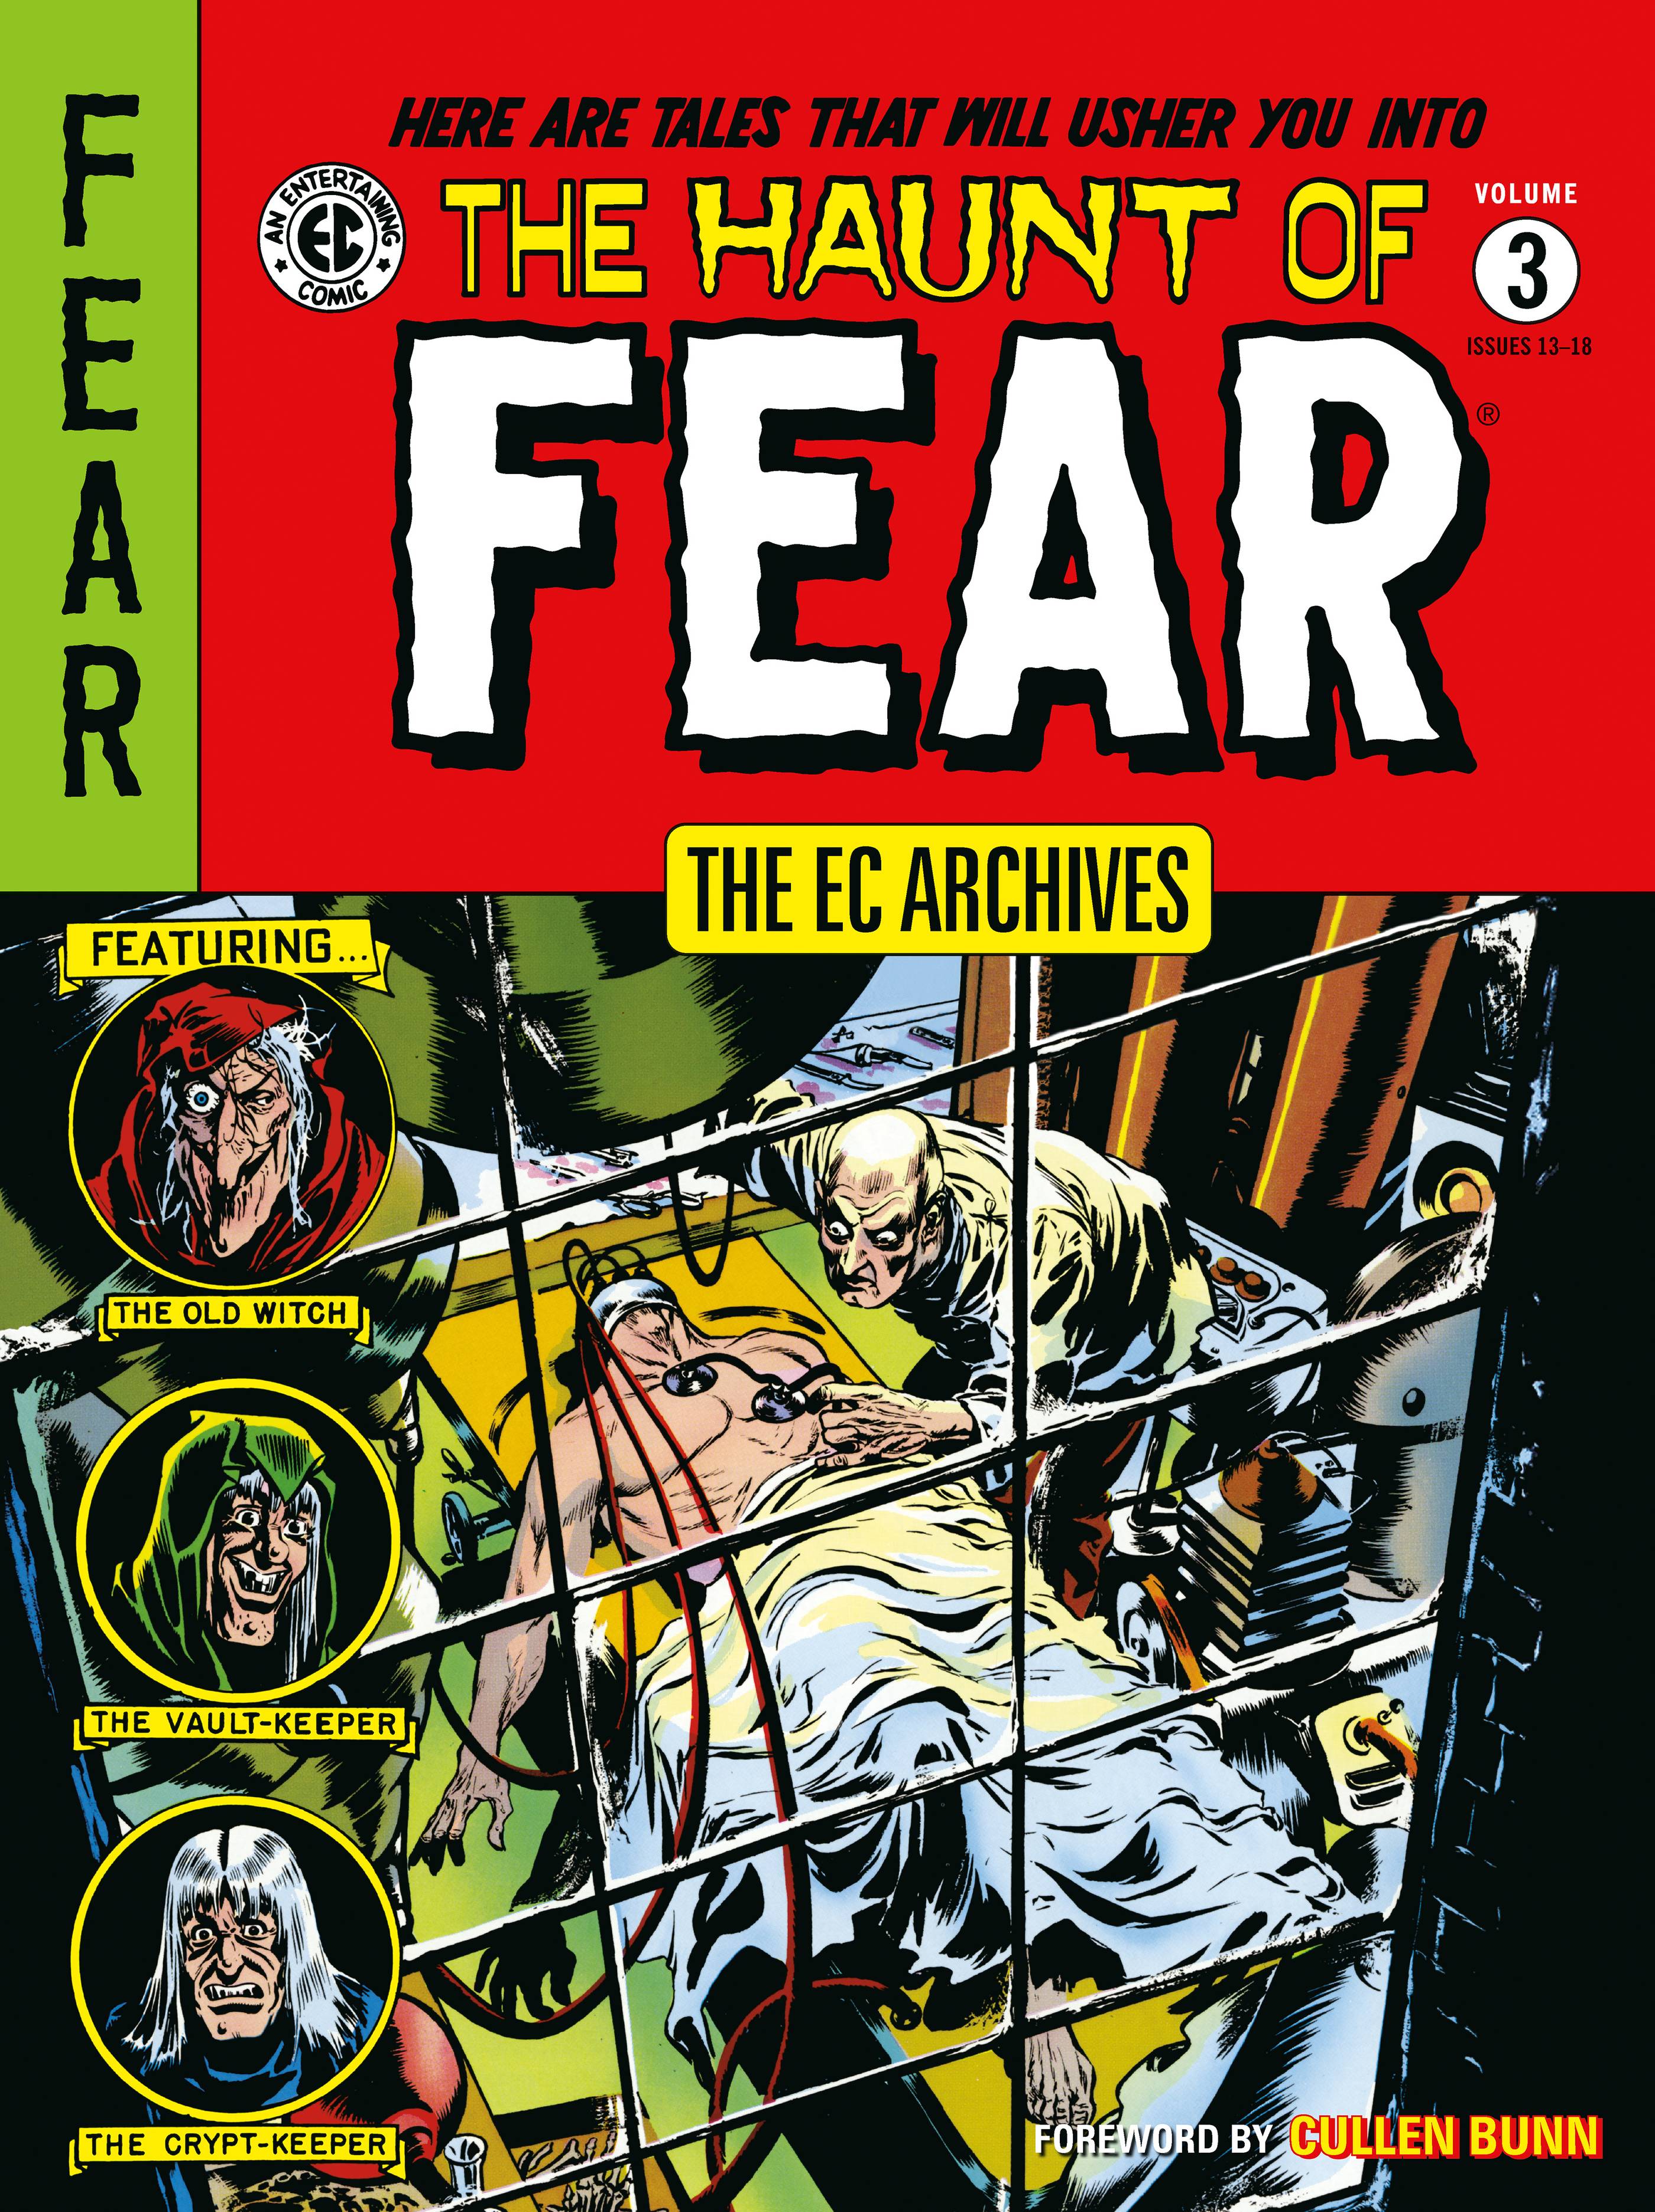 The EC Archives: The Haunt of Fear Volume 3 TP